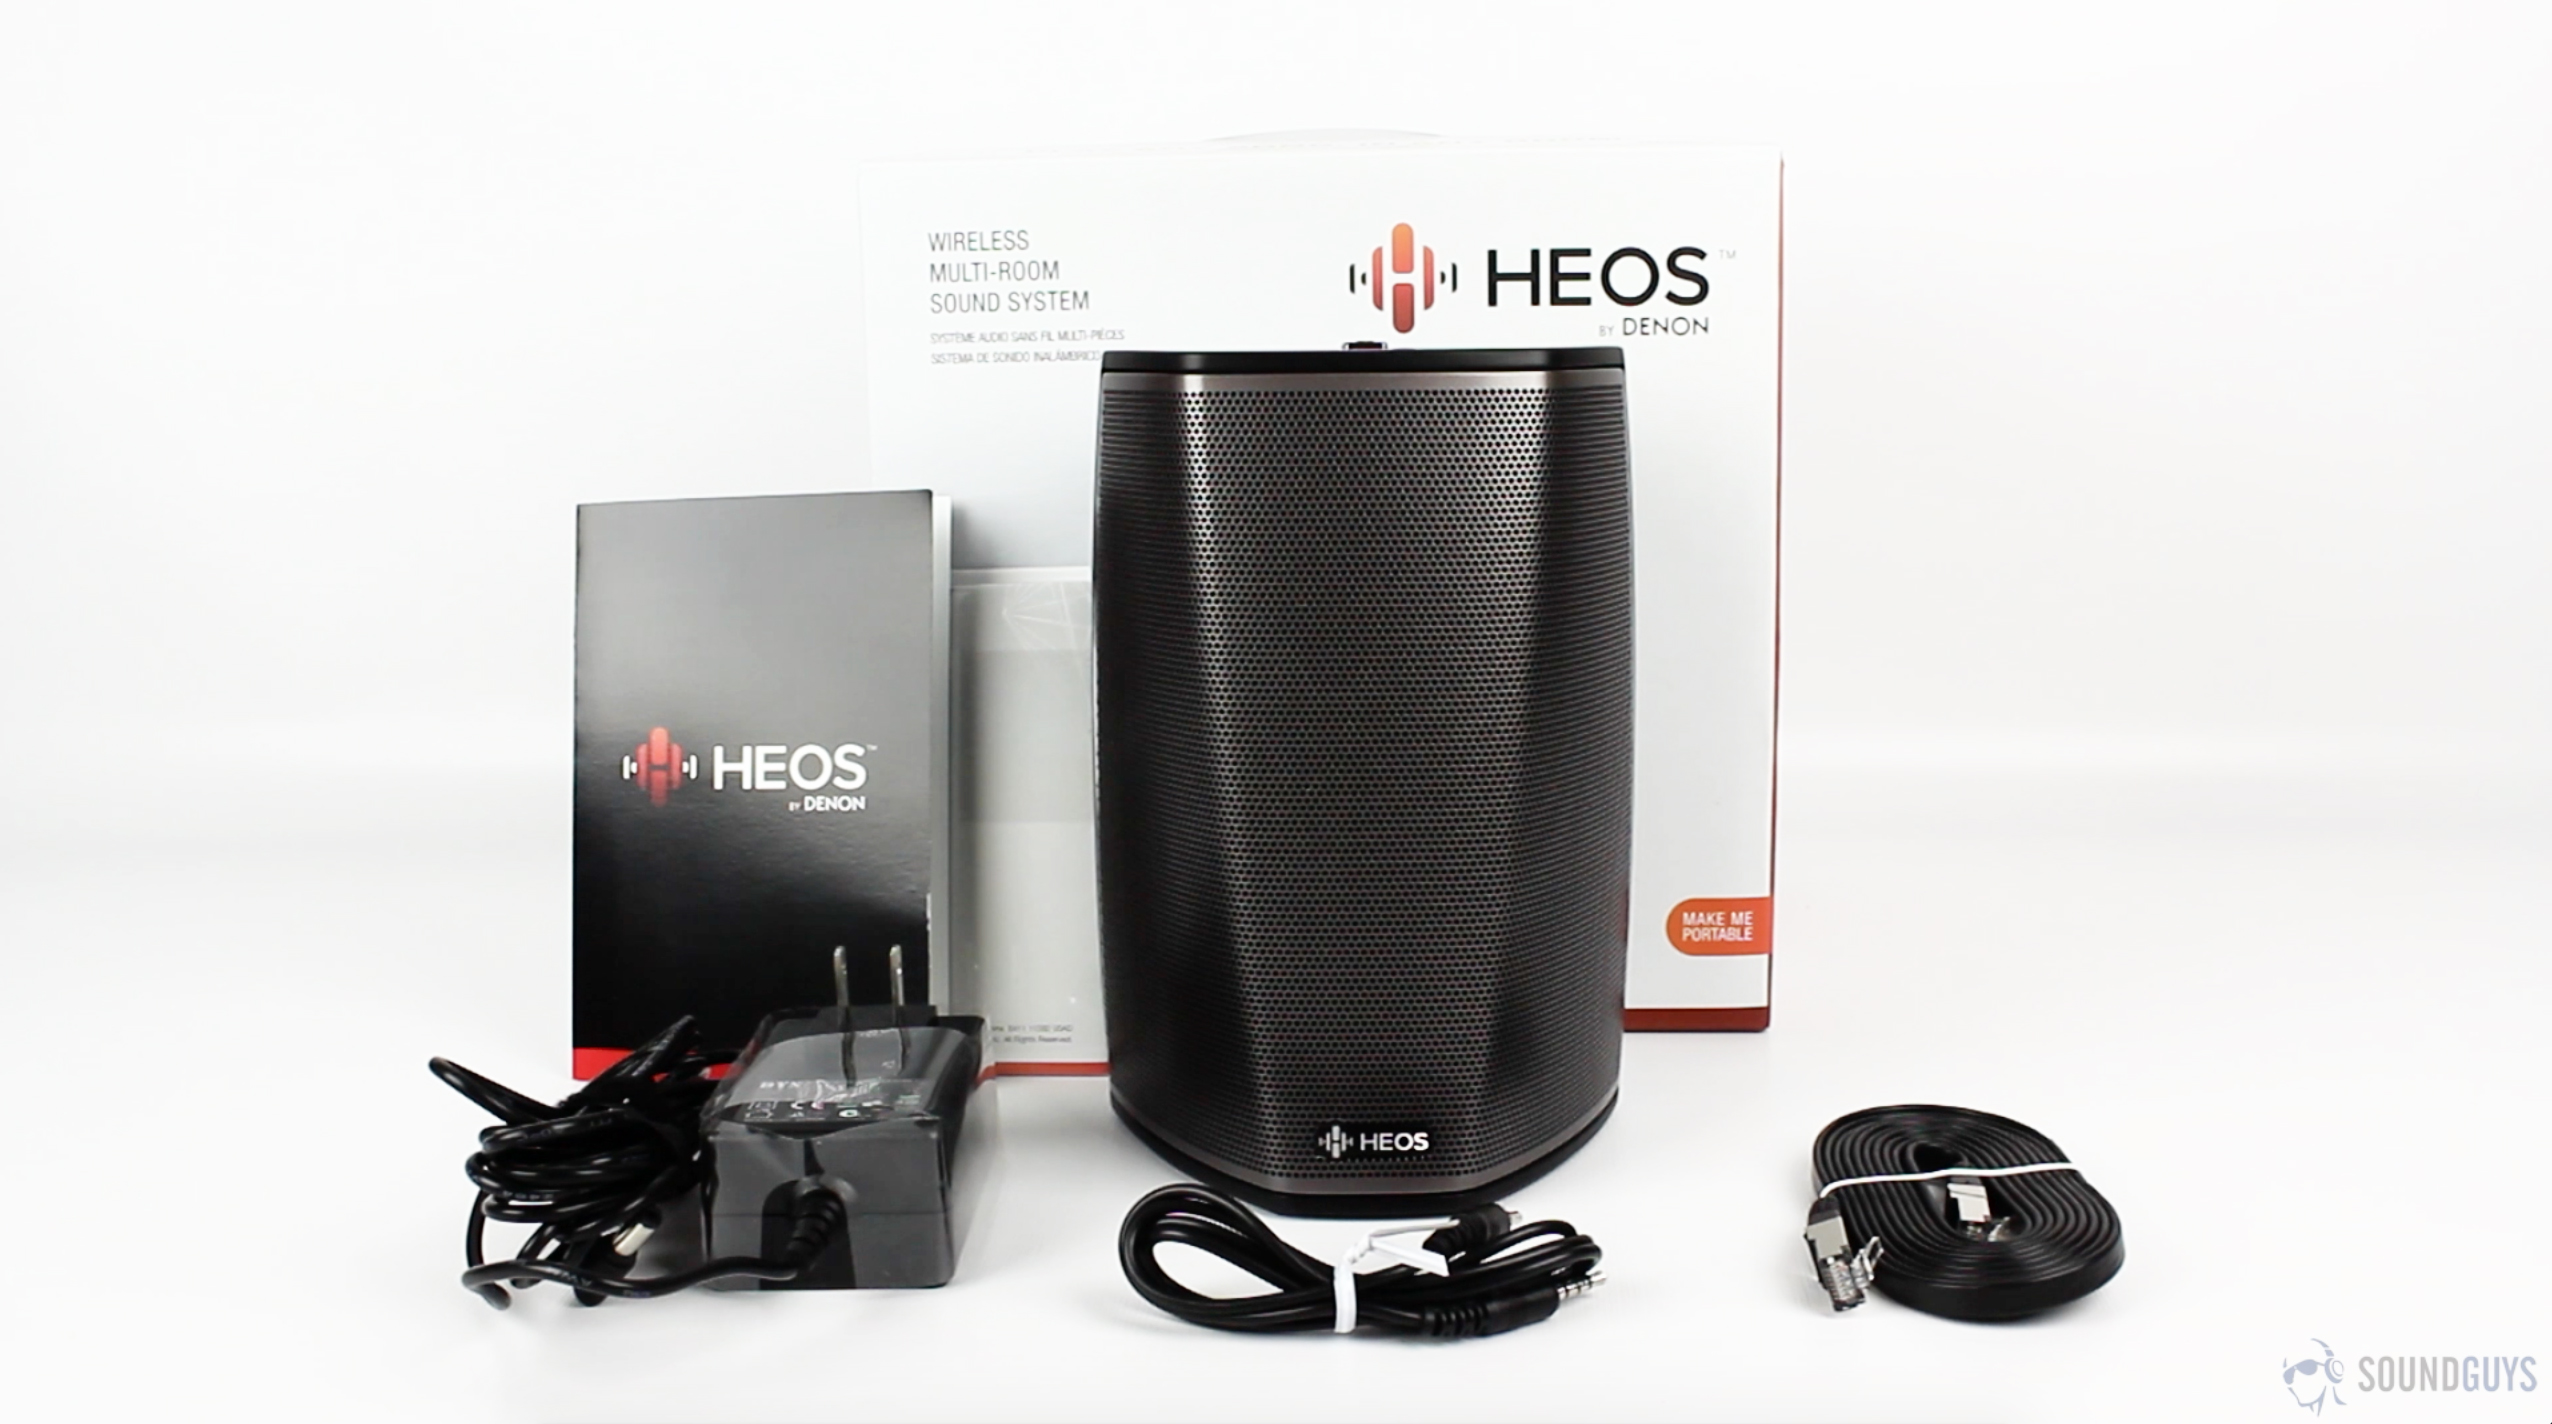 Denon HEOS 1 with box and wires against a white background.